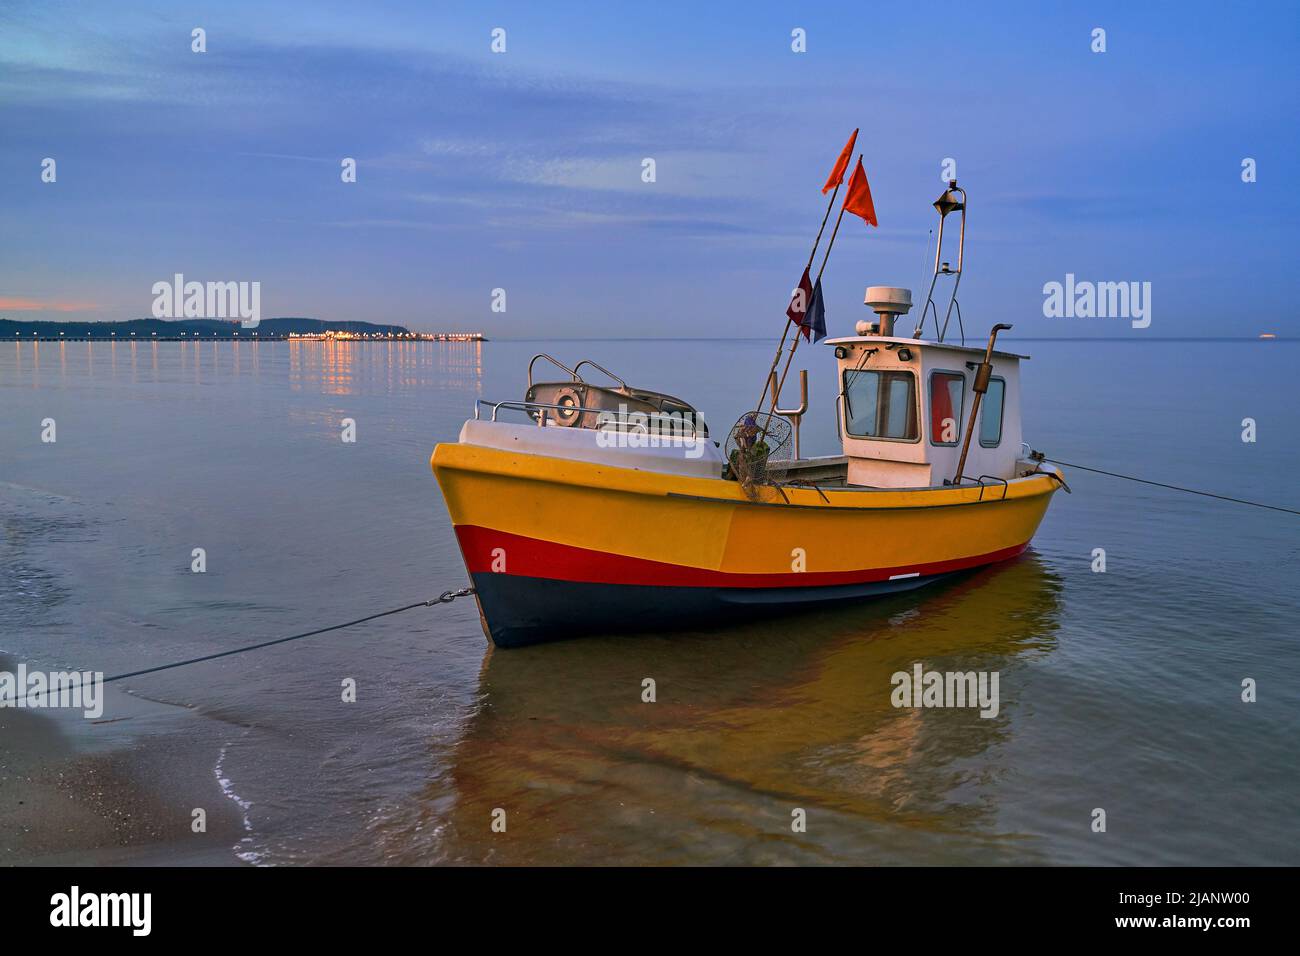 Picturesque moored fishing boat on beach in Sopot, Pomorskie region, Poland Stock Photo